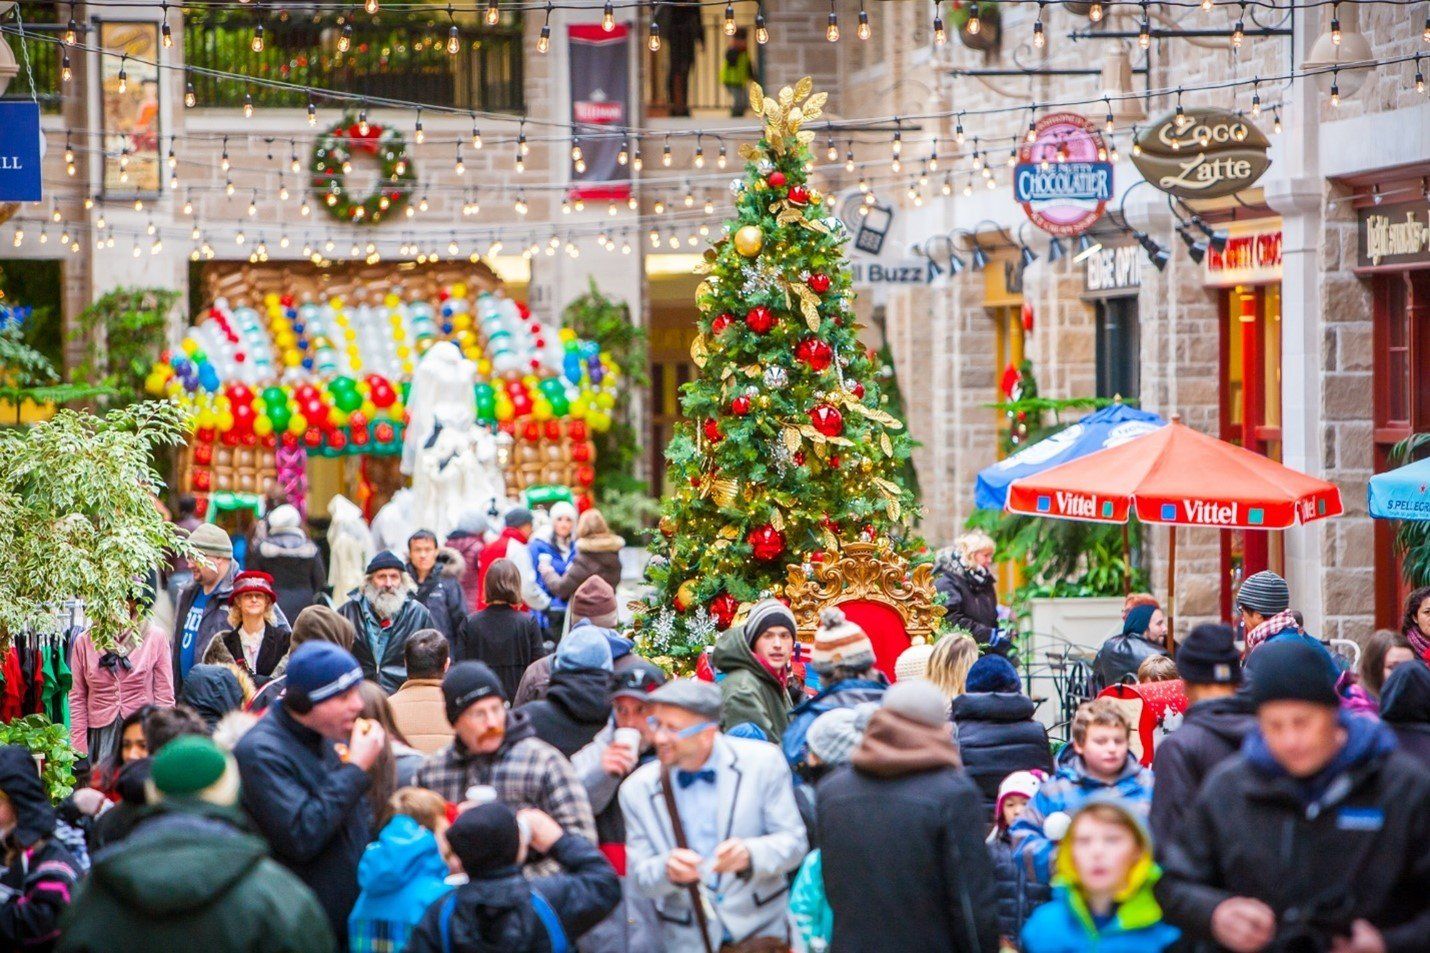 Christmas at Old Quebec Street Mall - adults and children are buzzing around different vendor shops that are decorated with Christmas Trees, wreathes, and lights.